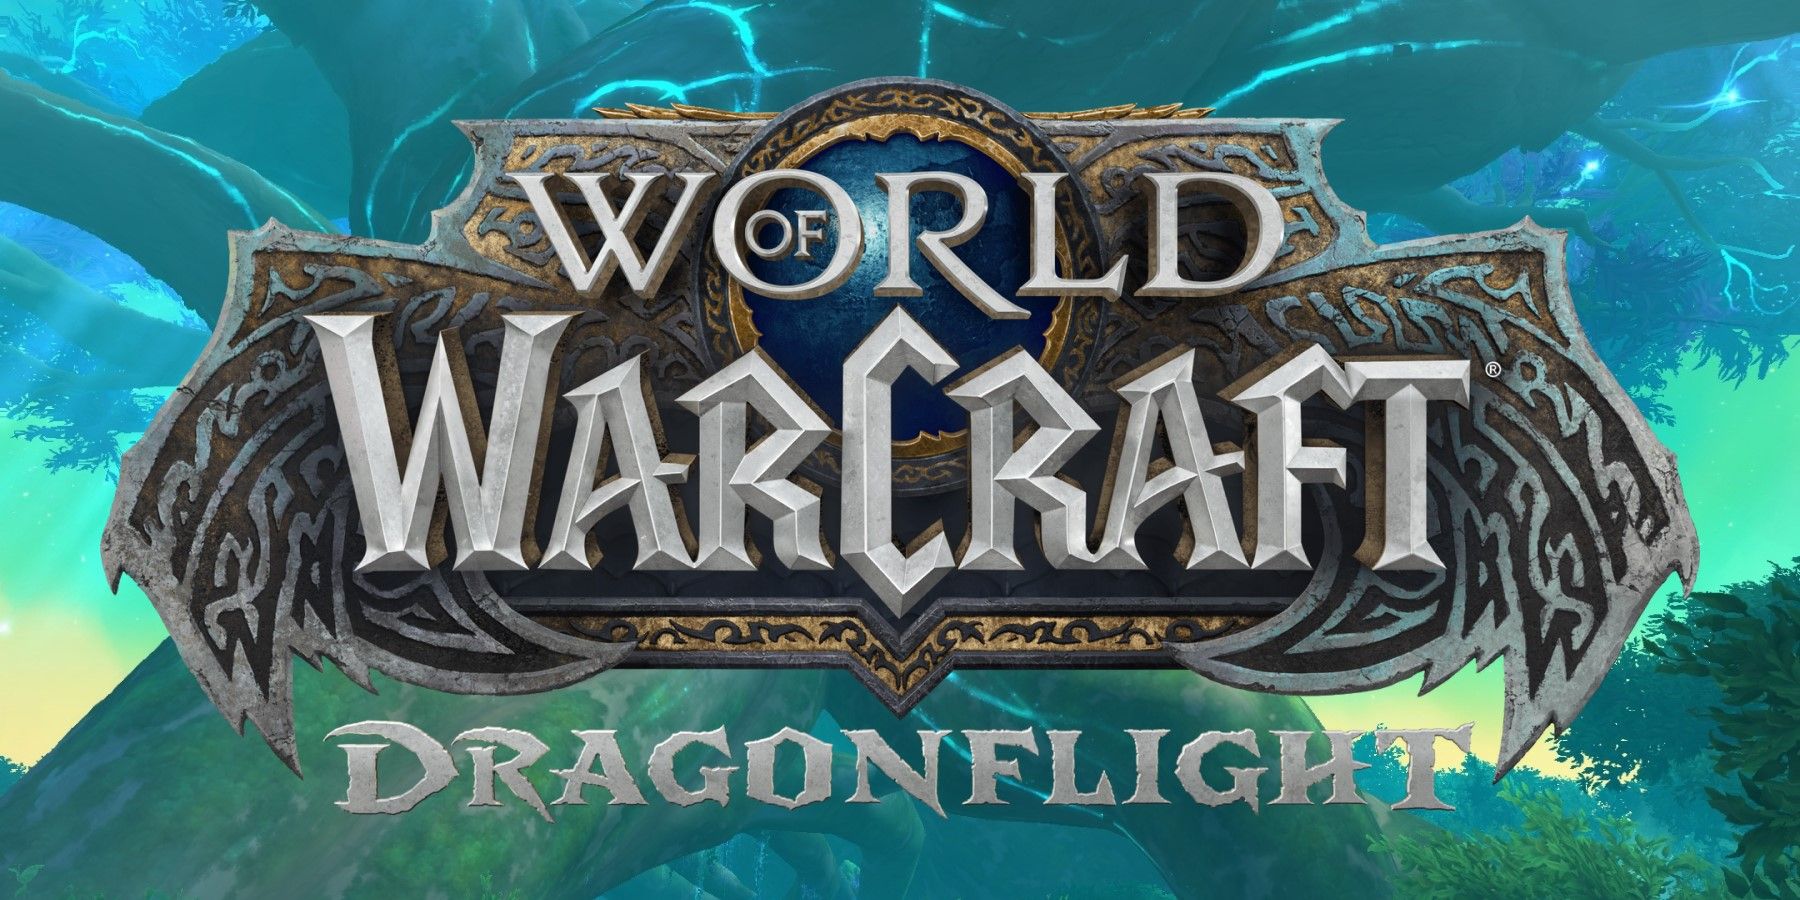 amirdrassil the world tree from dragonflight with the wow logo in front of it